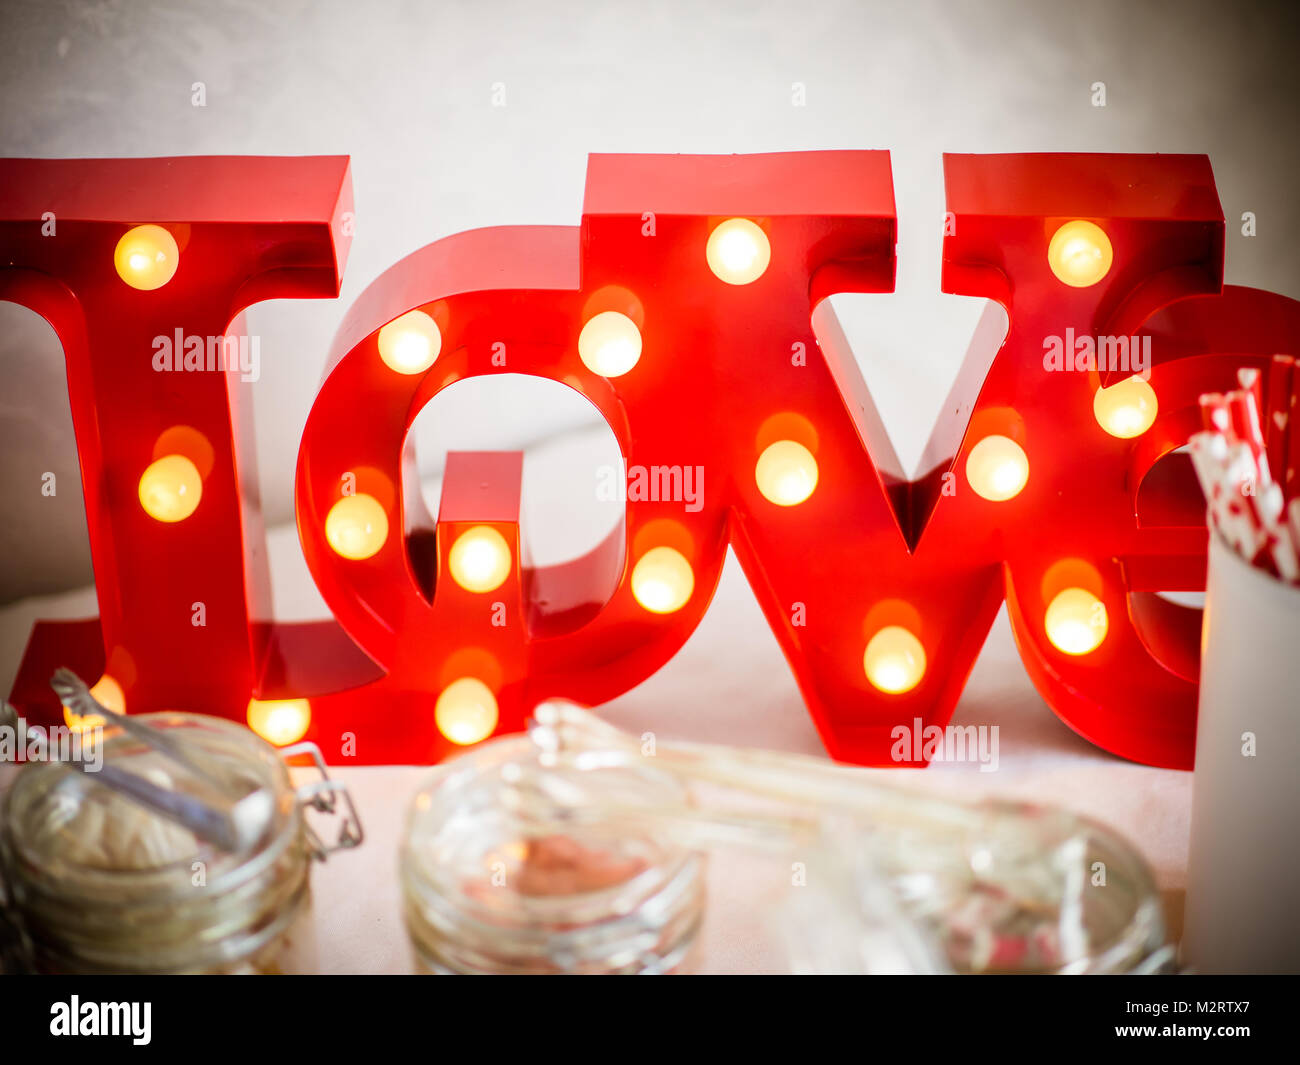 the sign with letters love Stock Photo